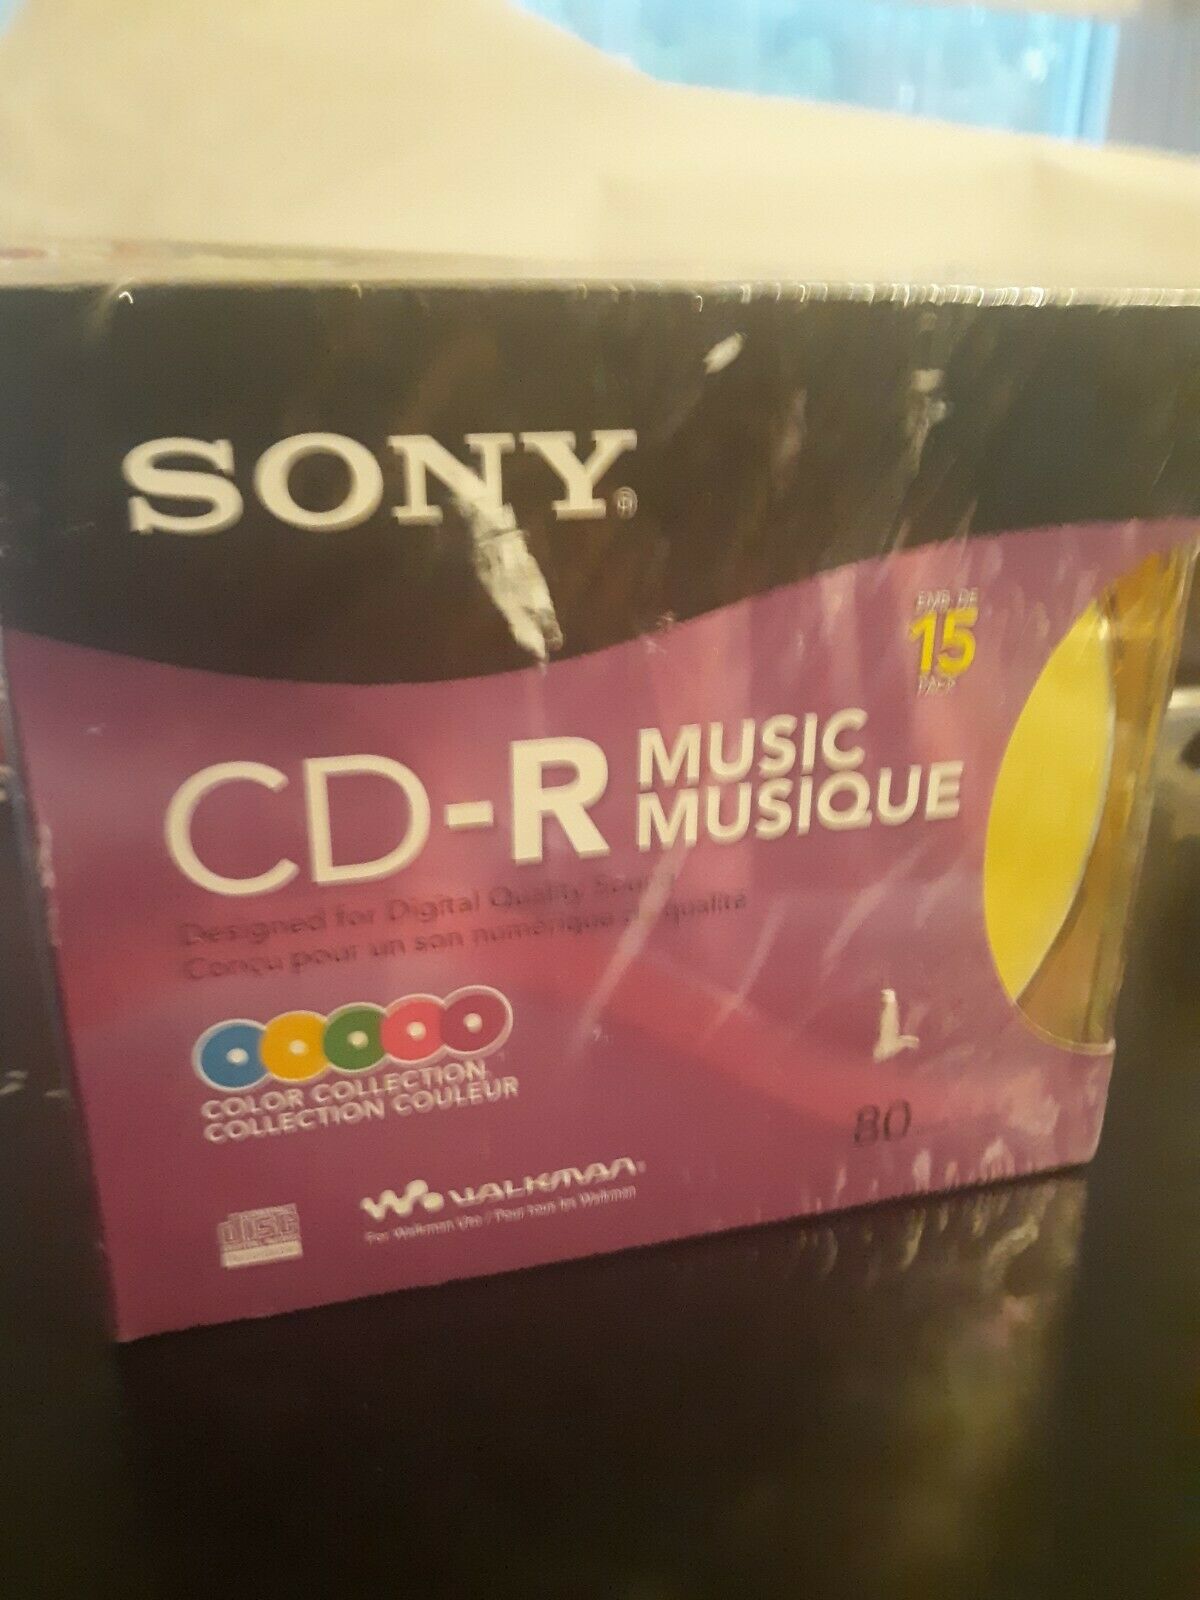 Sony Cd-r Music 15 Pack 80 Min Discs W/ Slim Cases Color Collection New Sealed